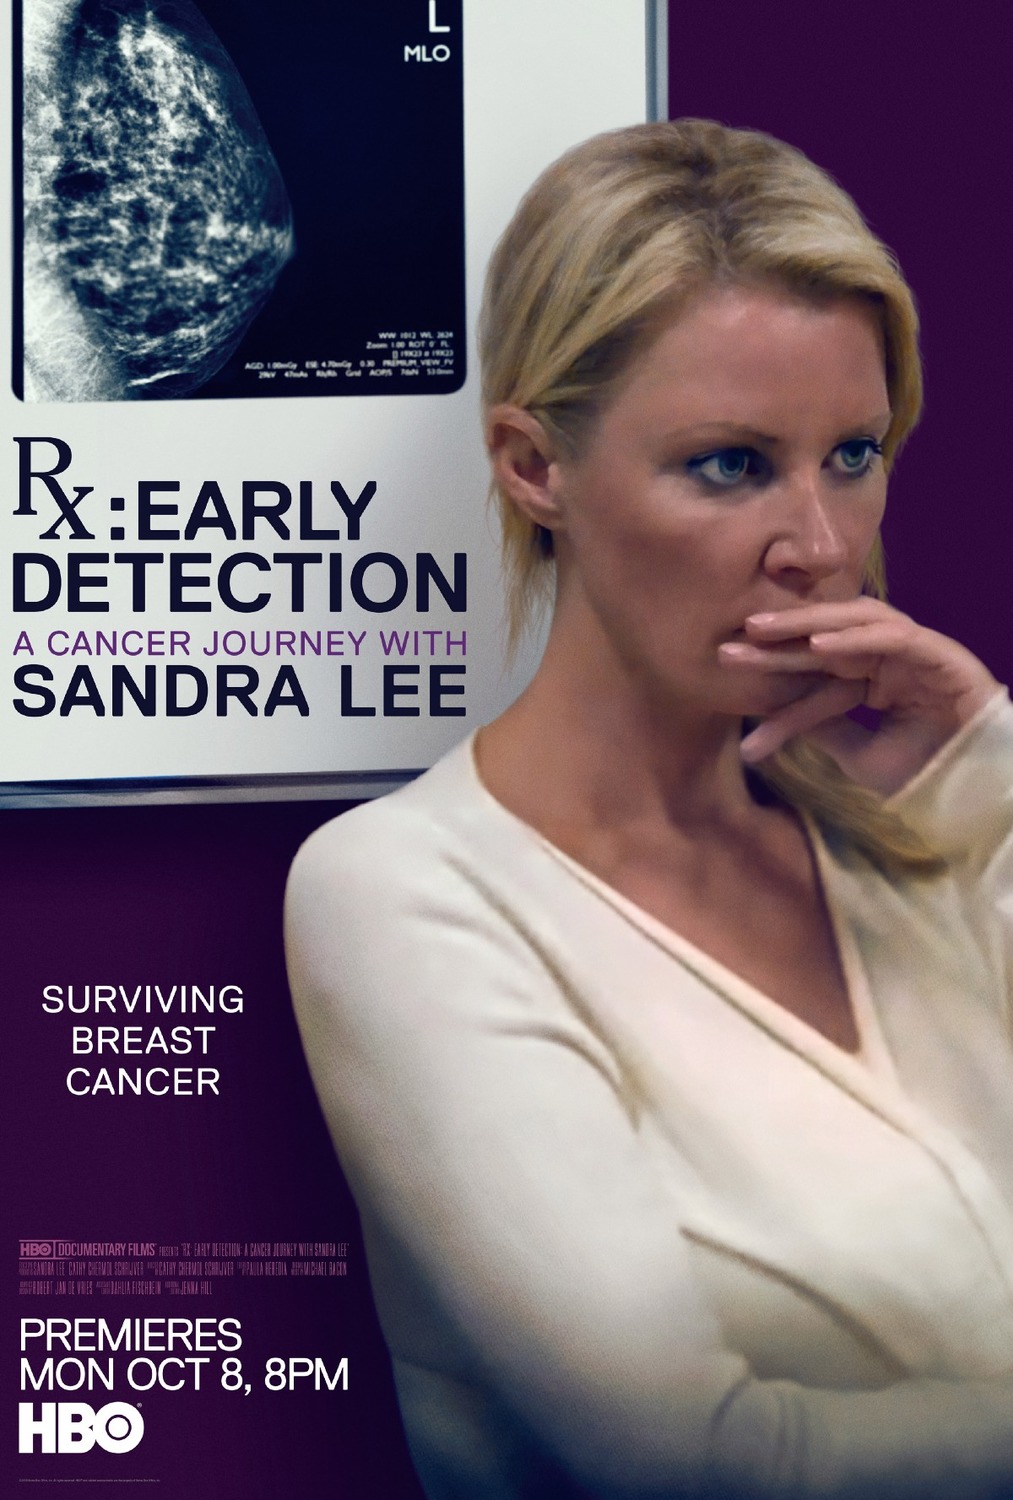 Extra Large TV Poster Image for RX: Early Detection - A Cancer Journey with Sandra Lee 